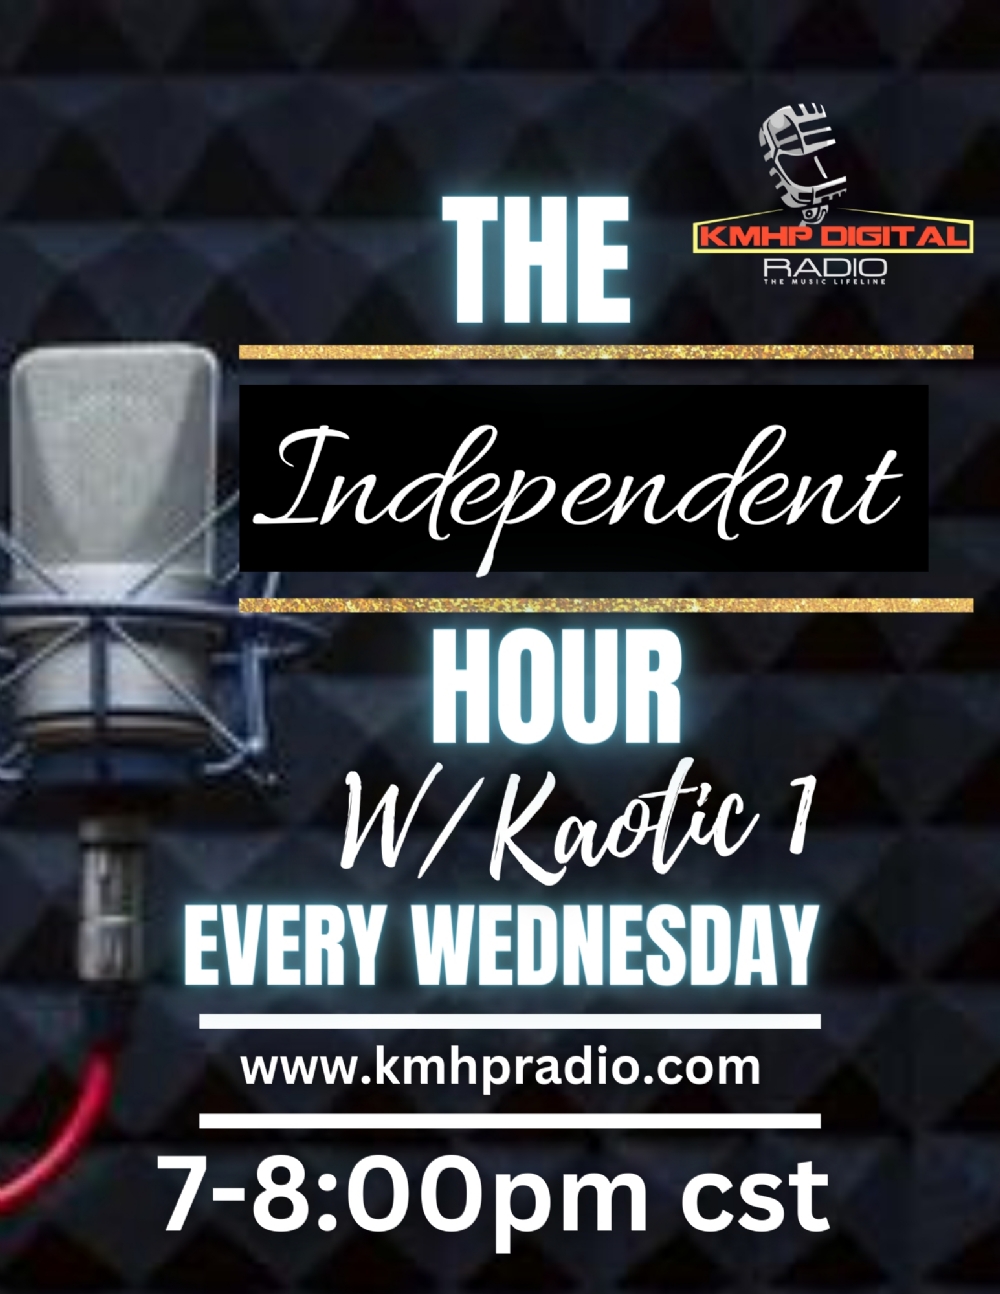 The Independent Hour